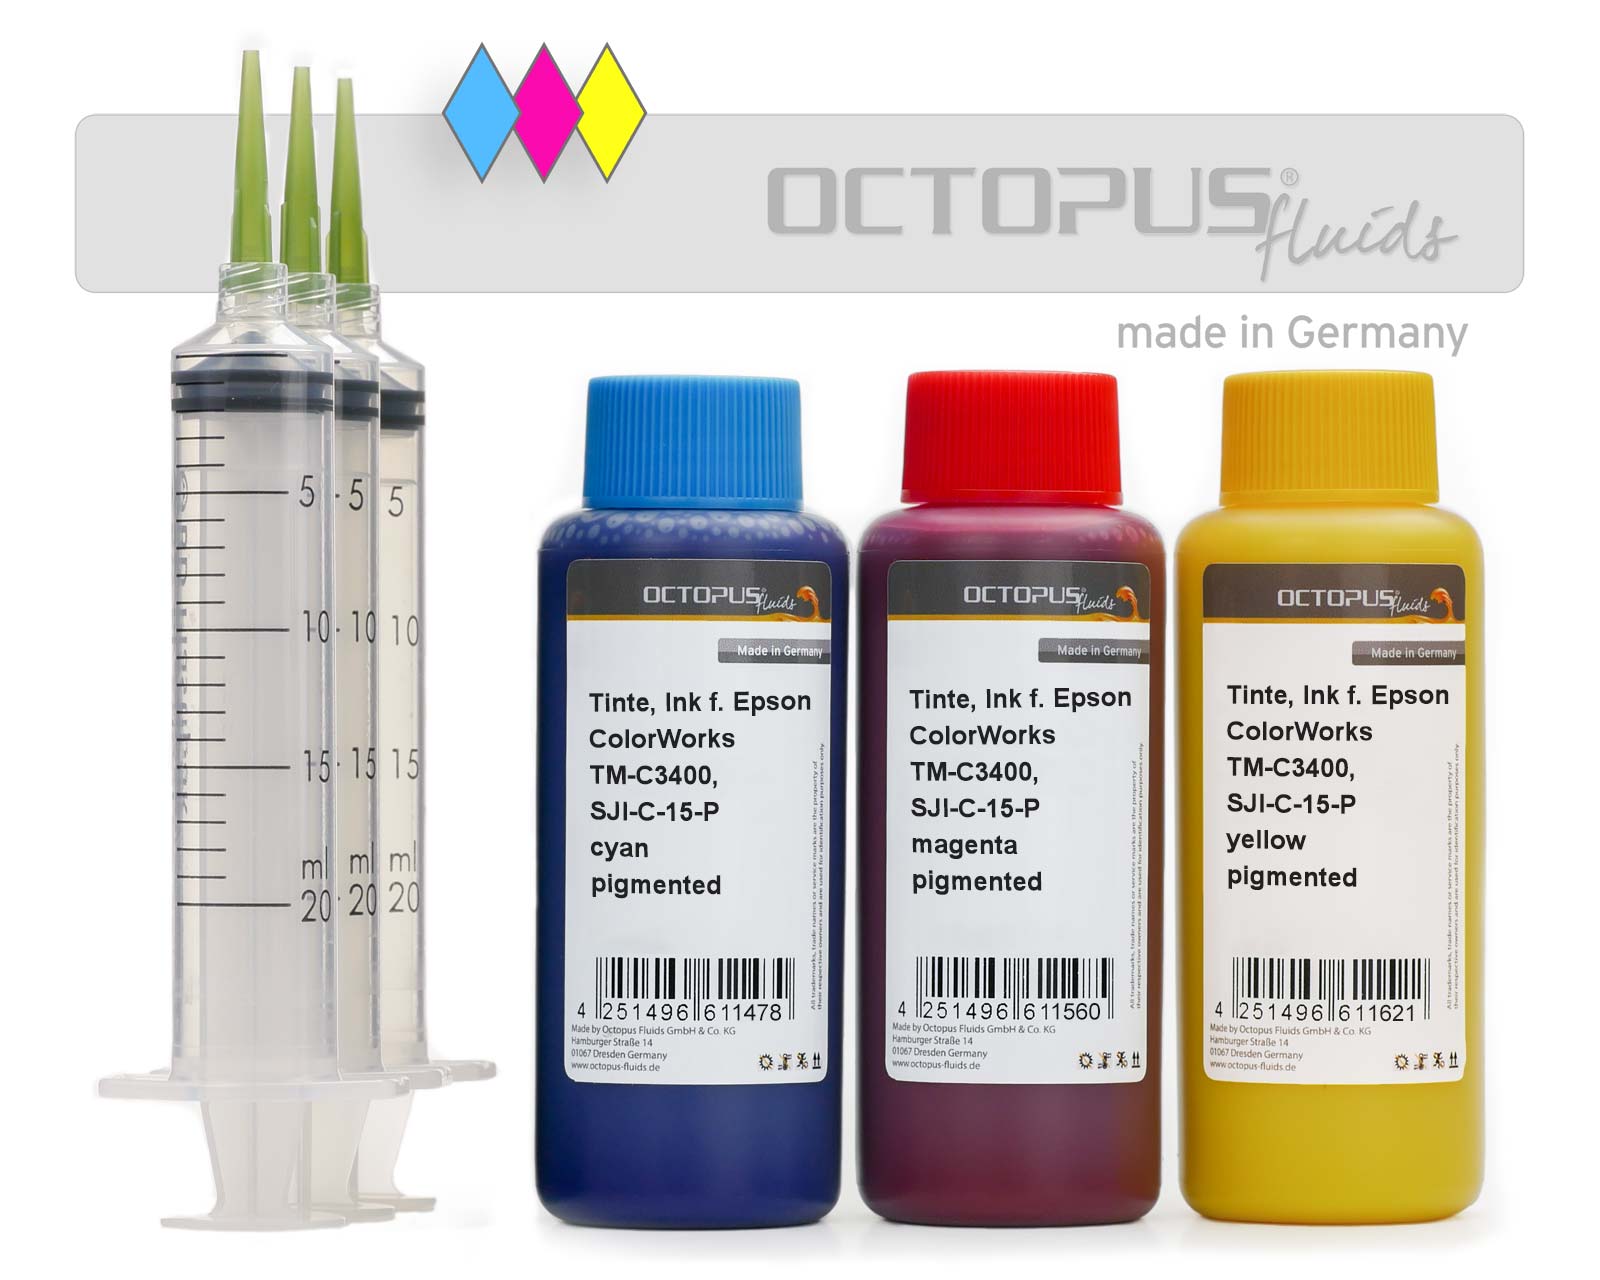 3x Refill ink and refill tool for Label printer Epson ColorWorks TM-C3400, SJI-C-15-P